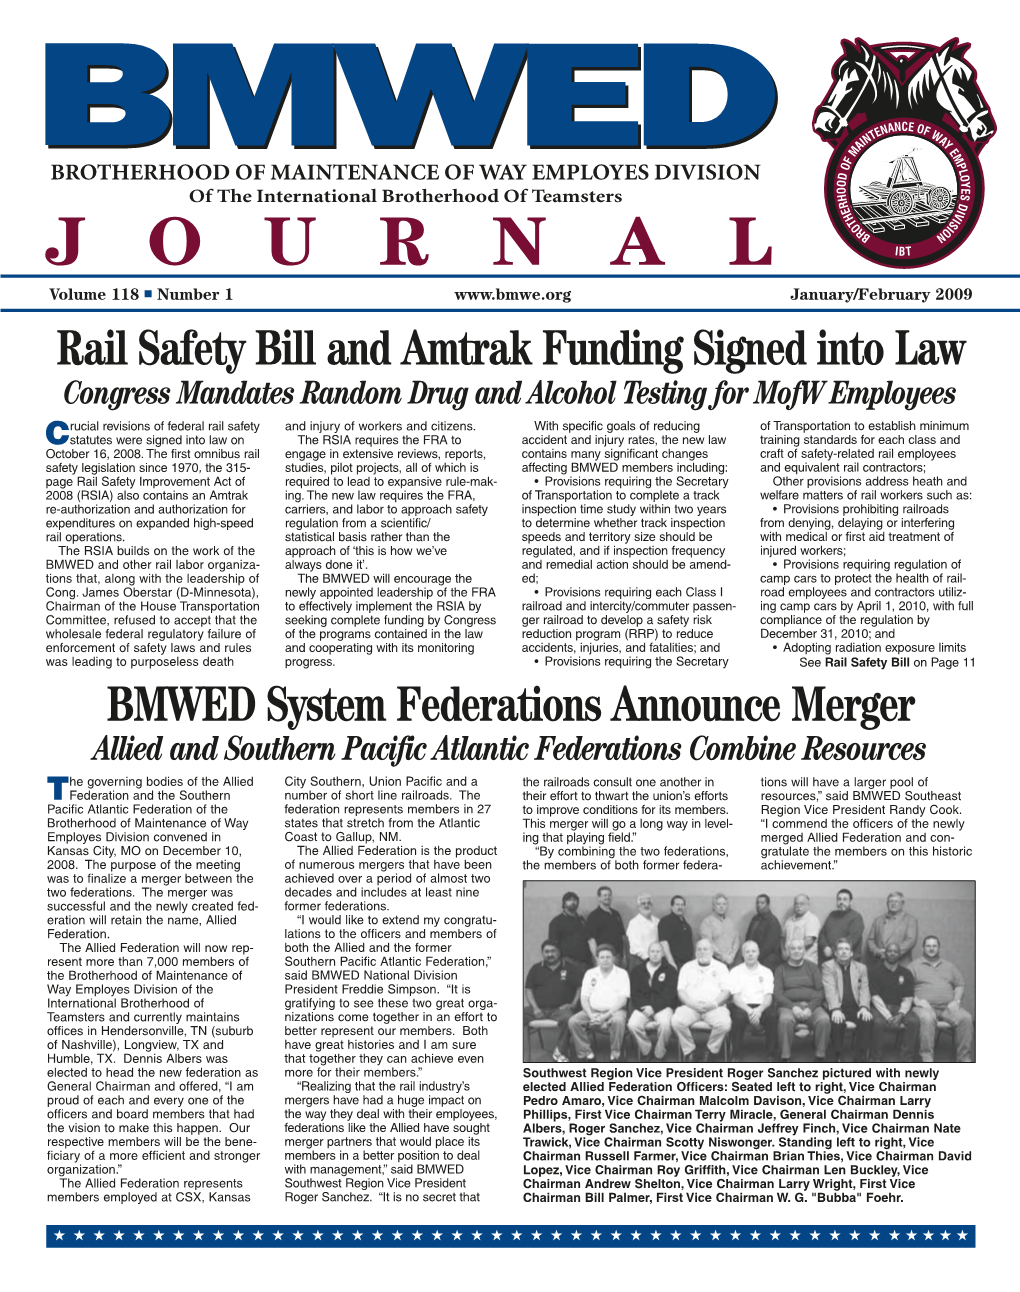 Rail Safety Bill and Amtrak Funding Signed Into Law BMWED System Federations Announce Merger